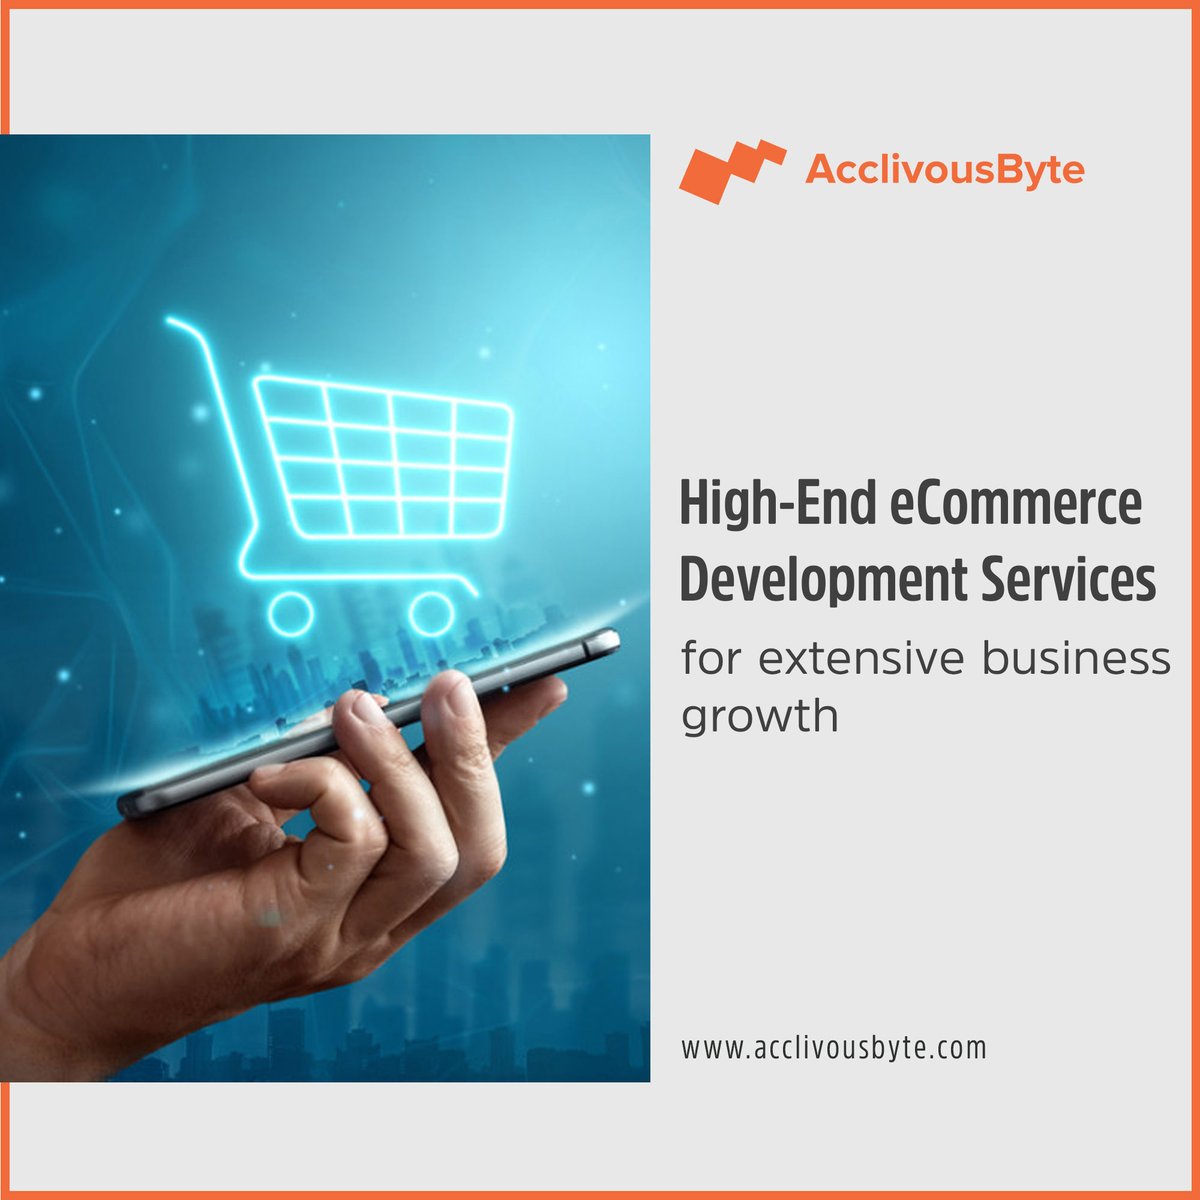 Top of the line eCommerce Improvement Services
for broad business development.

#ecommerceservices #ecommercestartup #eCommerceEntrepreneur #eCommerce #website #acclivousbyte